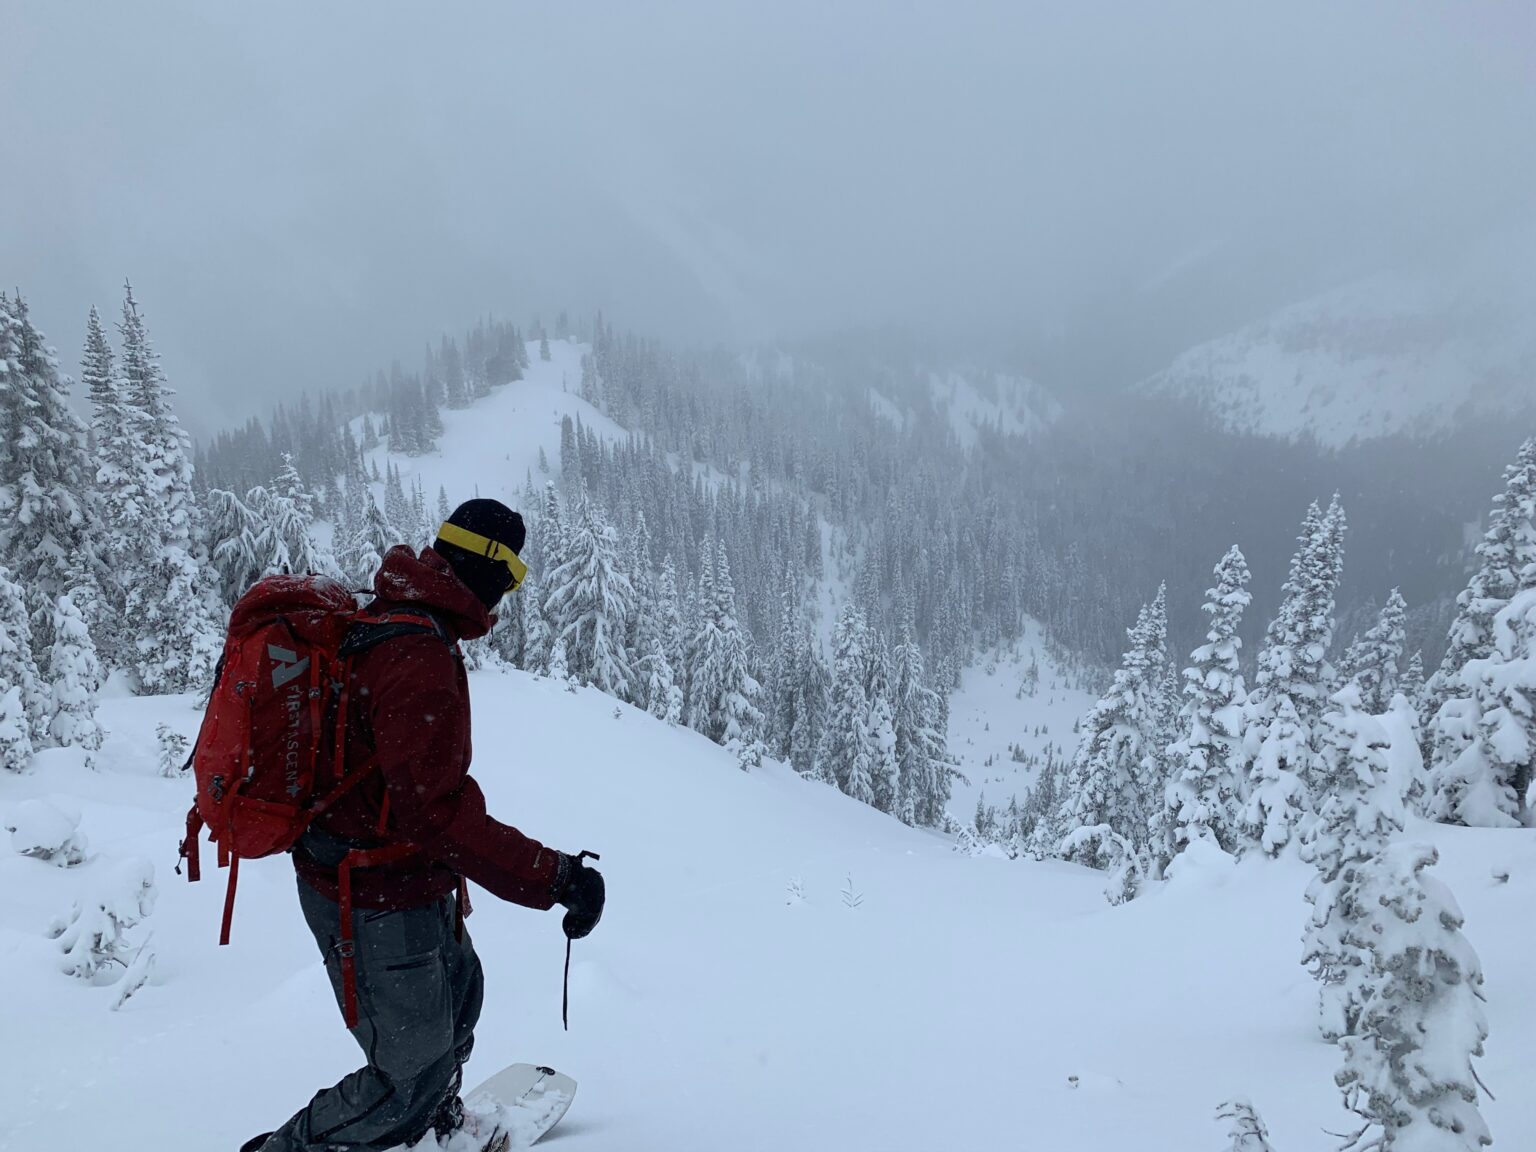 Standing on the summit of Bullion Peak before getting caught in an avalanche